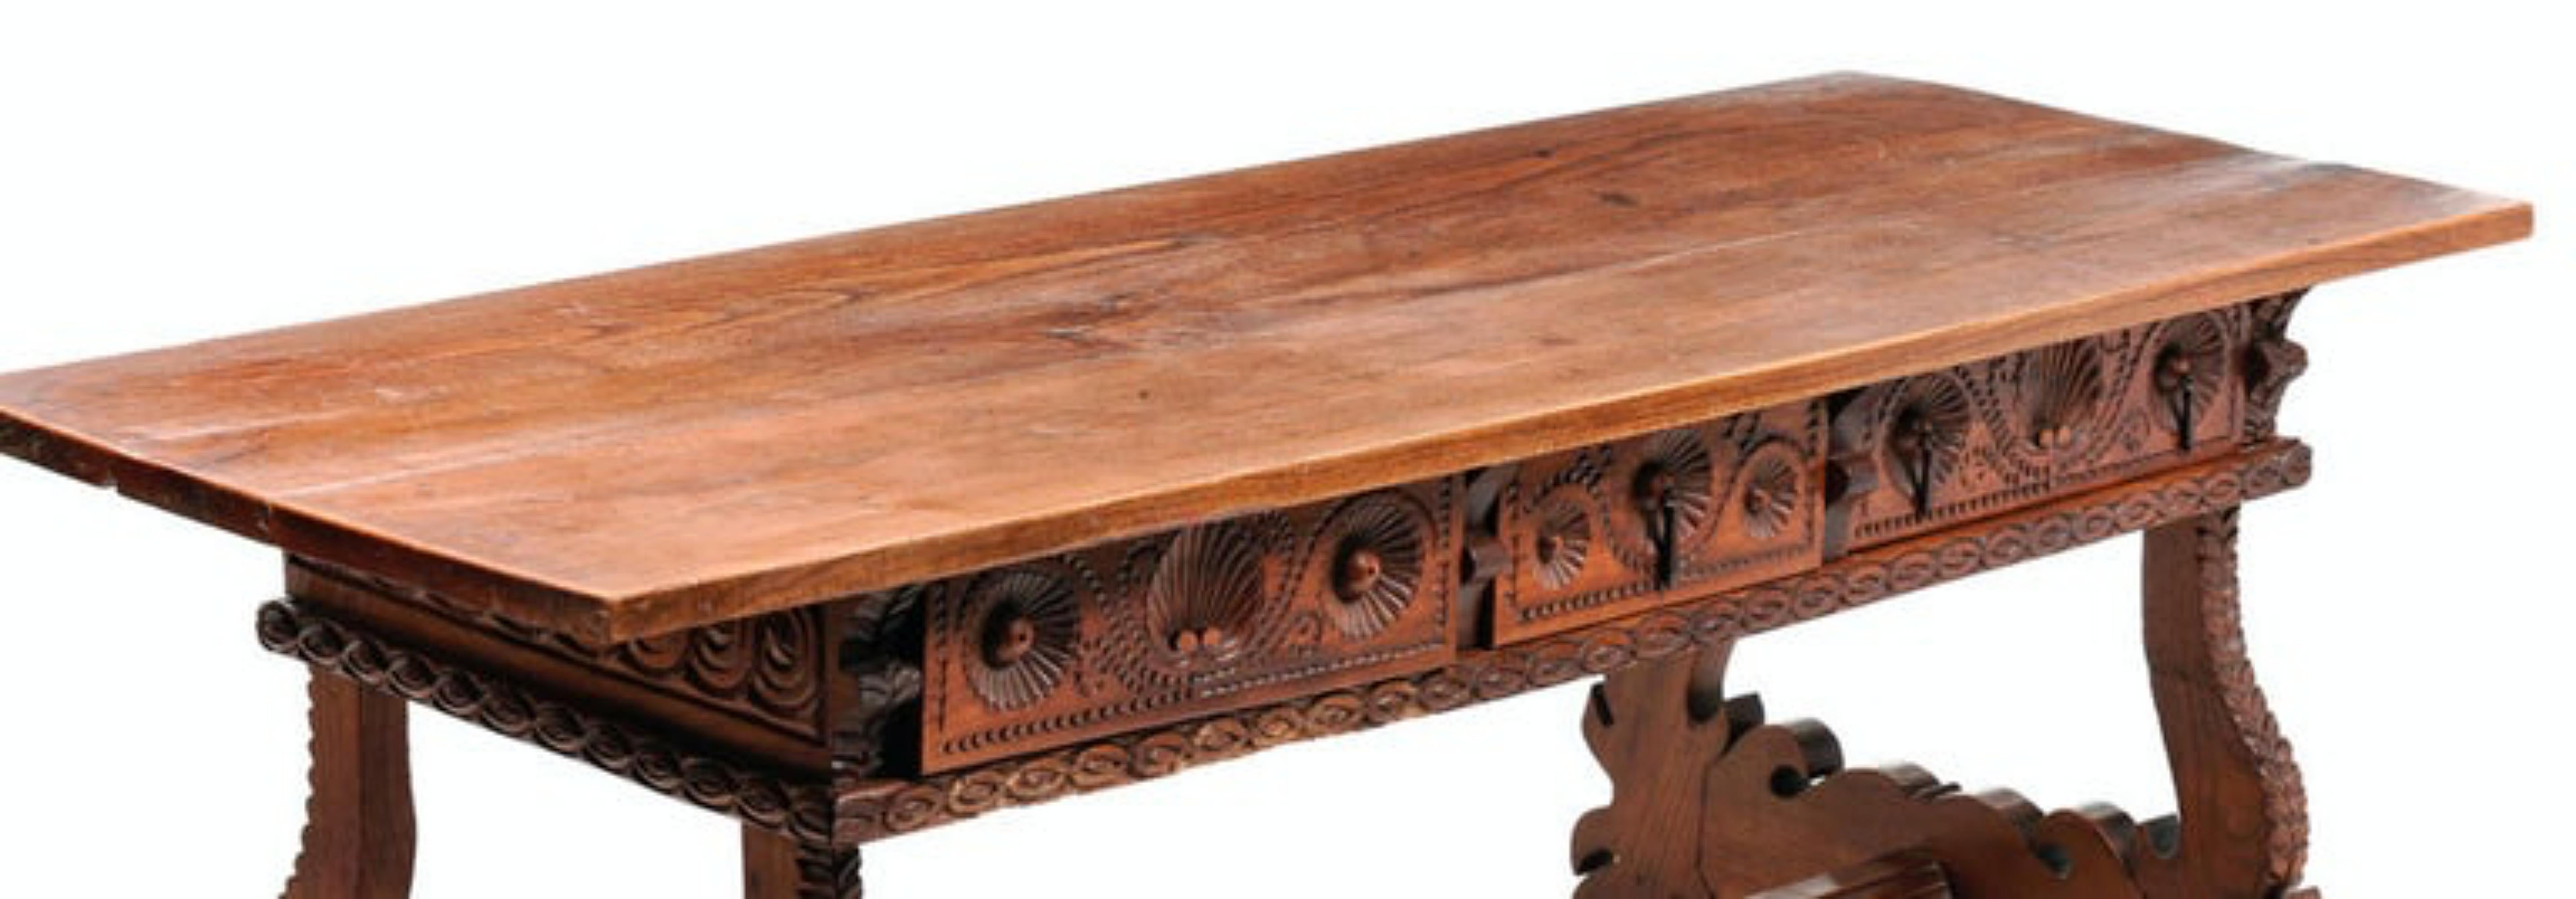 Portuguese Rustic Table 18th Century In Good Condition For Sale In Madrid, ES